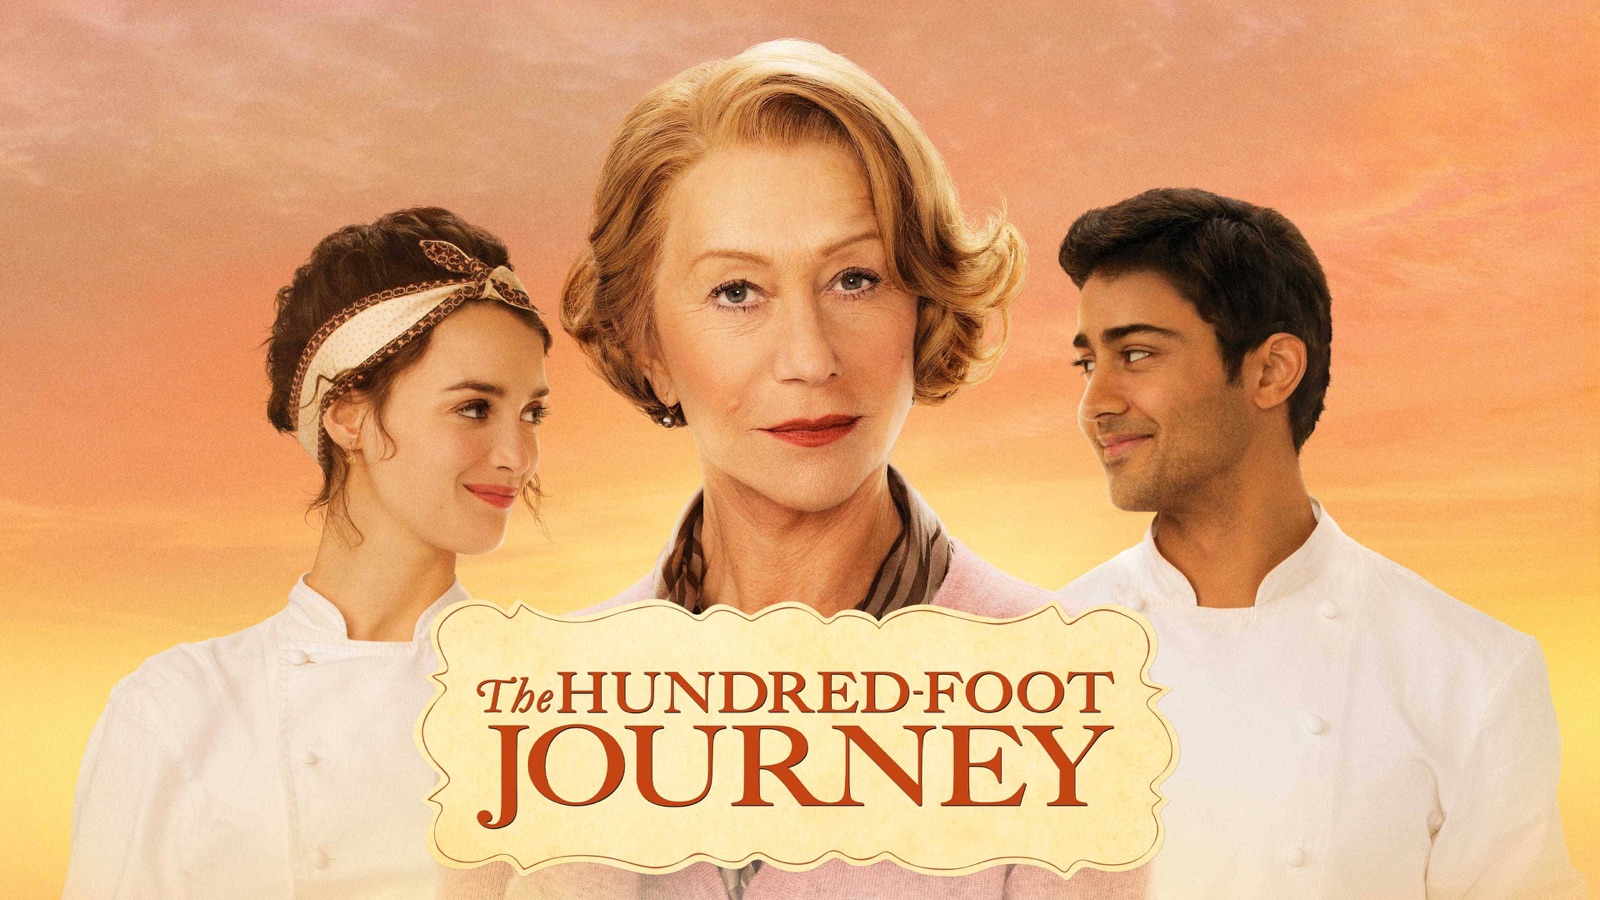 a hundred foot journey review